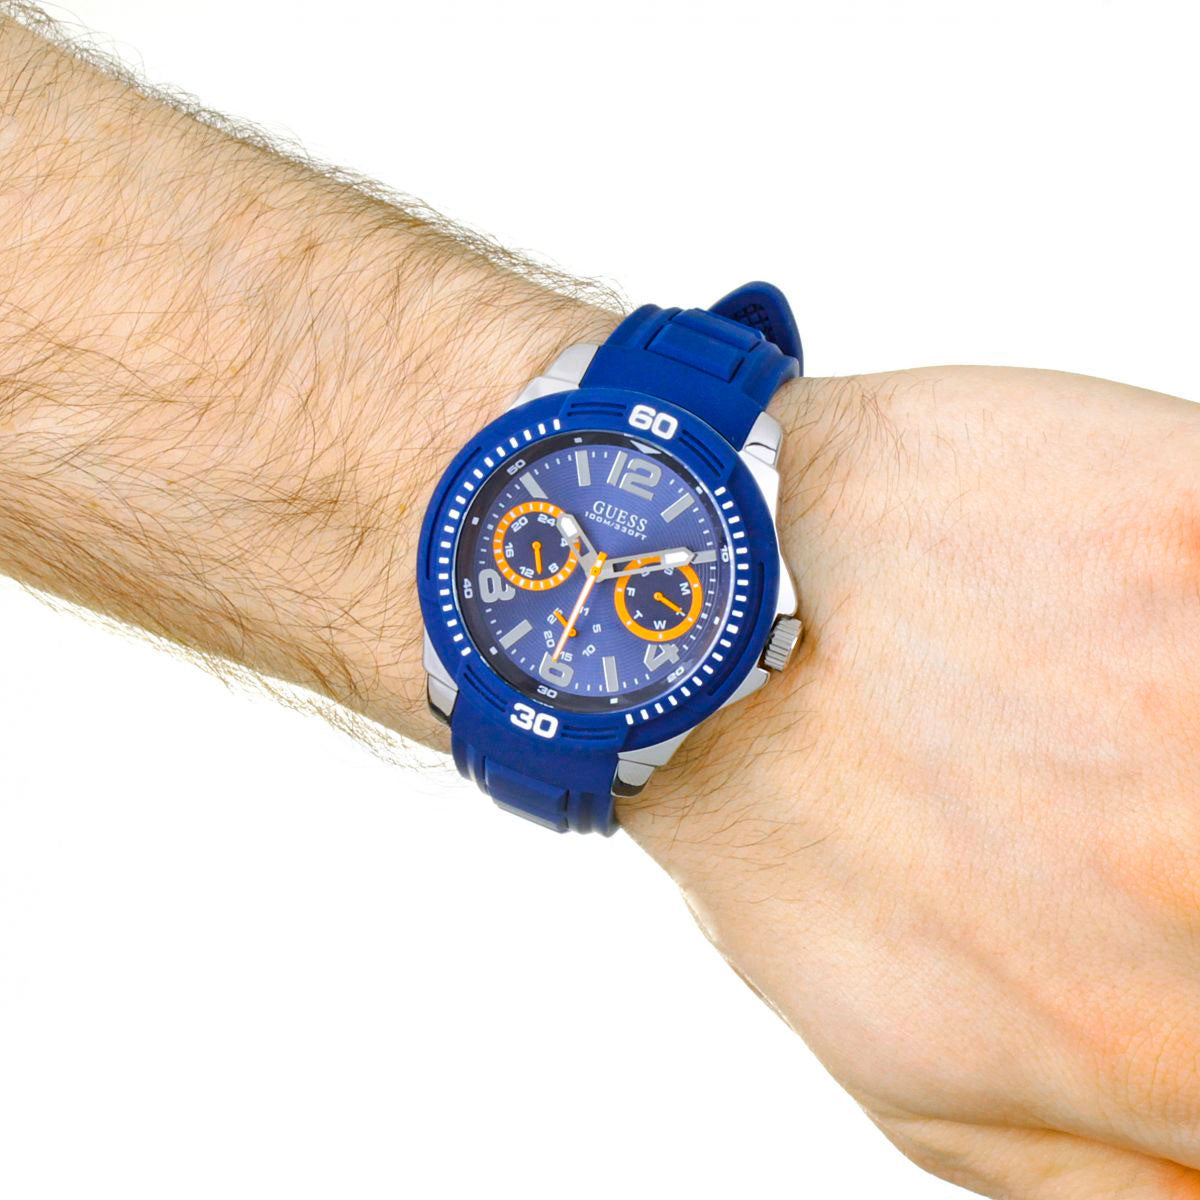 Guess Trade Blue Dial Blue Silicone Strap Watch for Men - W0967G2